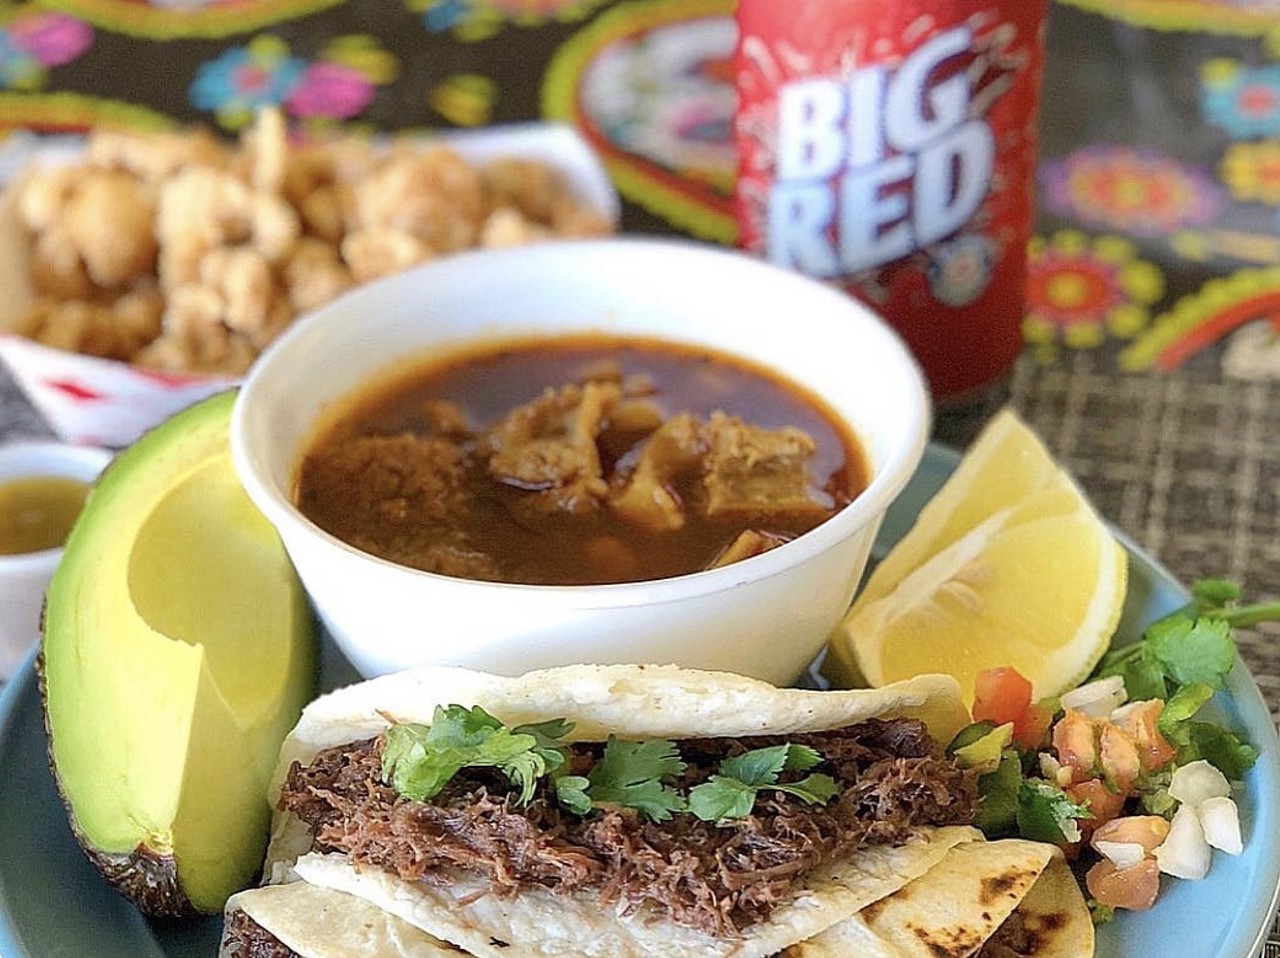 Big Red is the only acceptable beverage to enjoy with barbacoa.